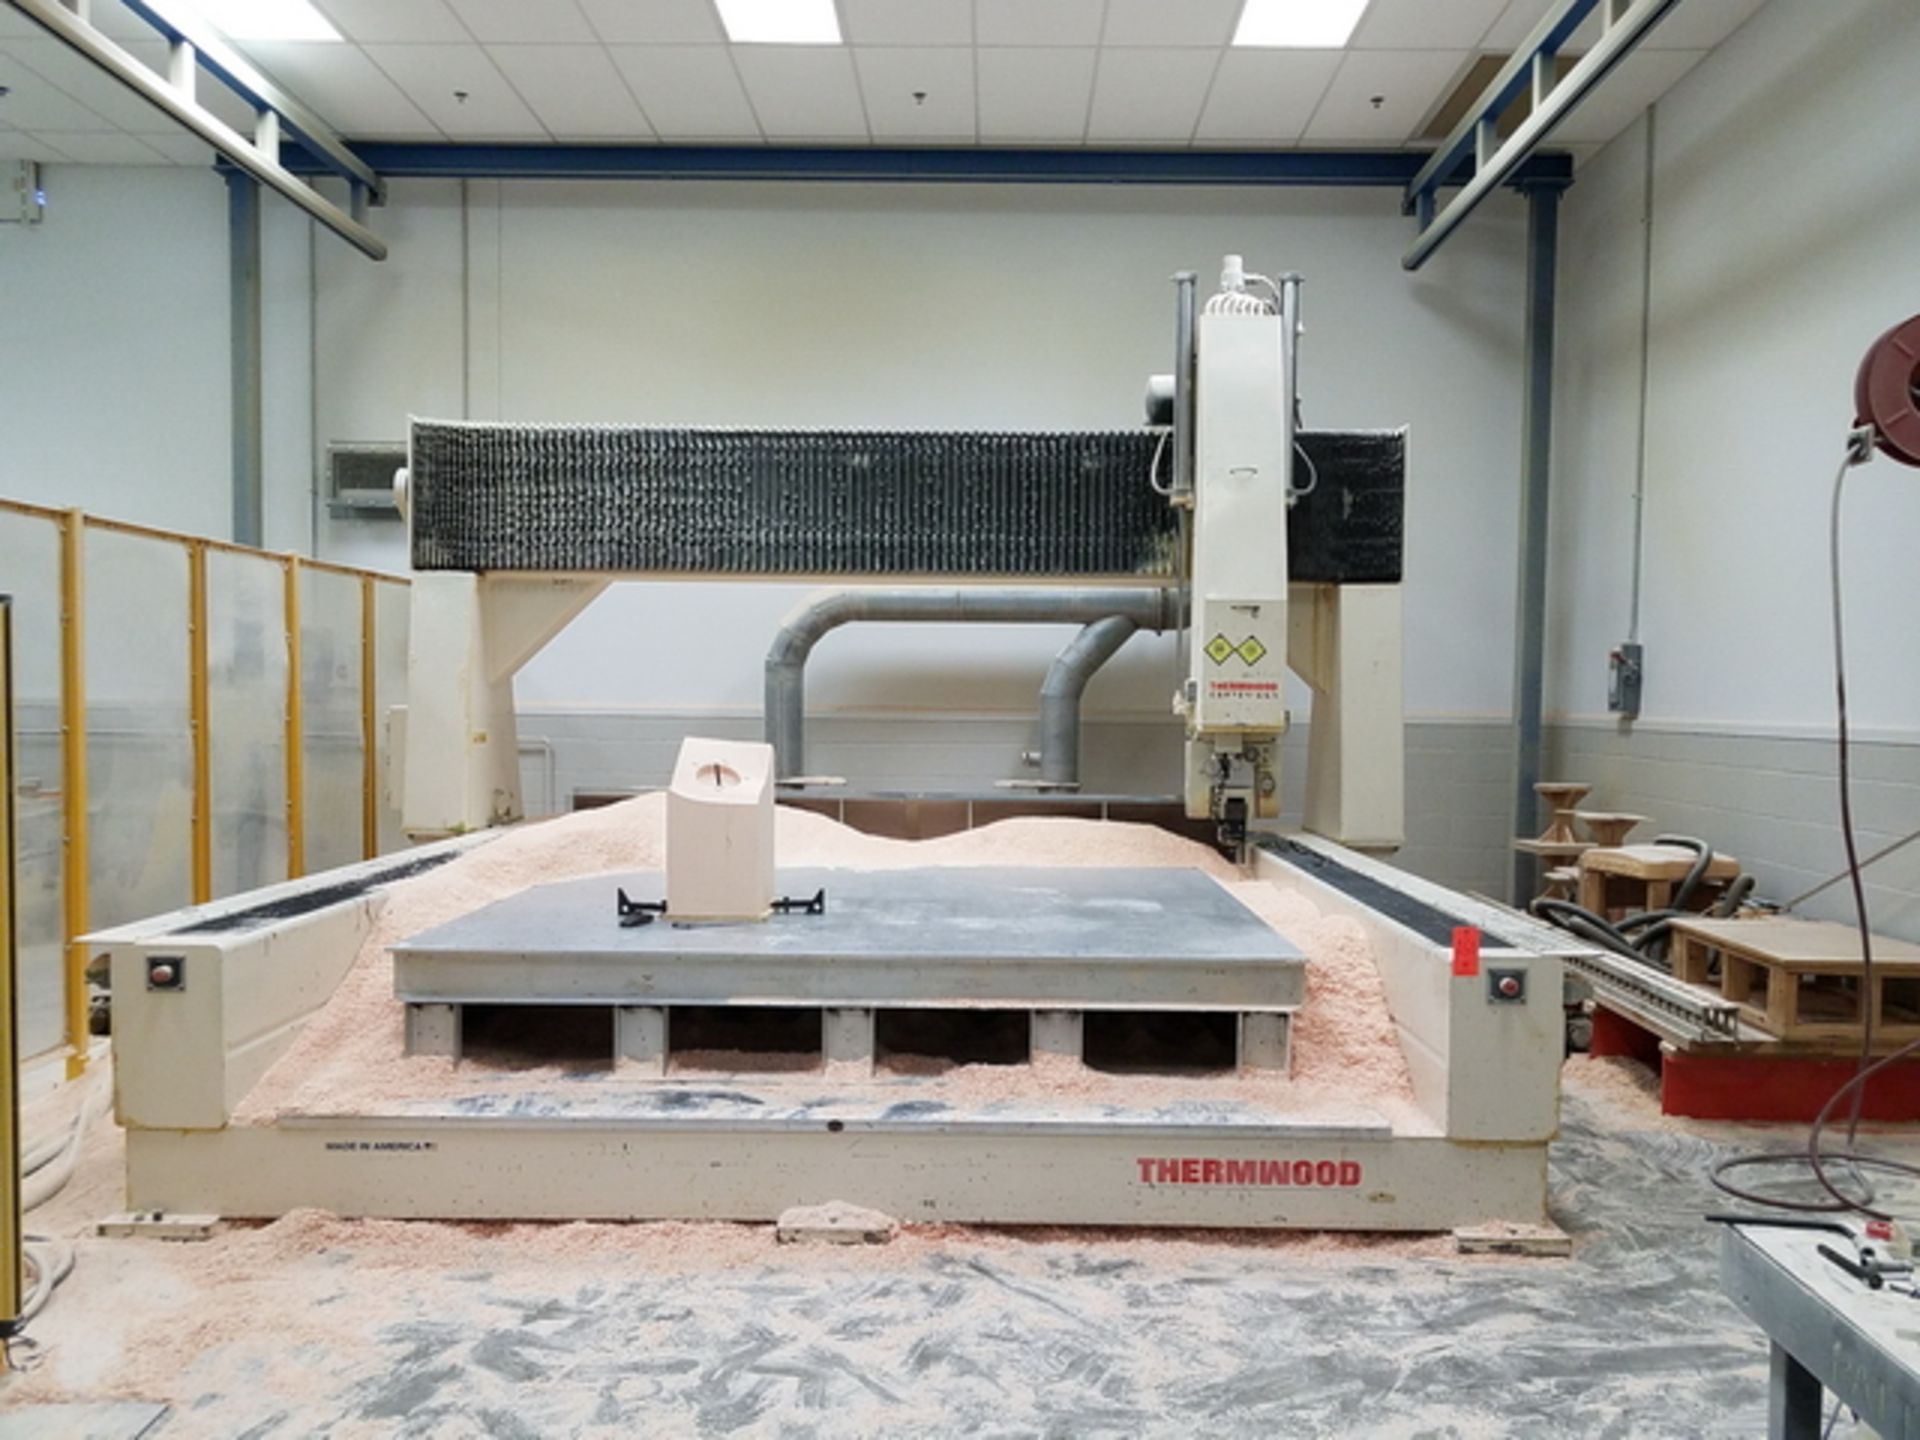 Thermwood C-72 5-Axis CNC Router, Gen2 Supercontrol with Cartesian 5" Remote, Showing 110034 hrs,